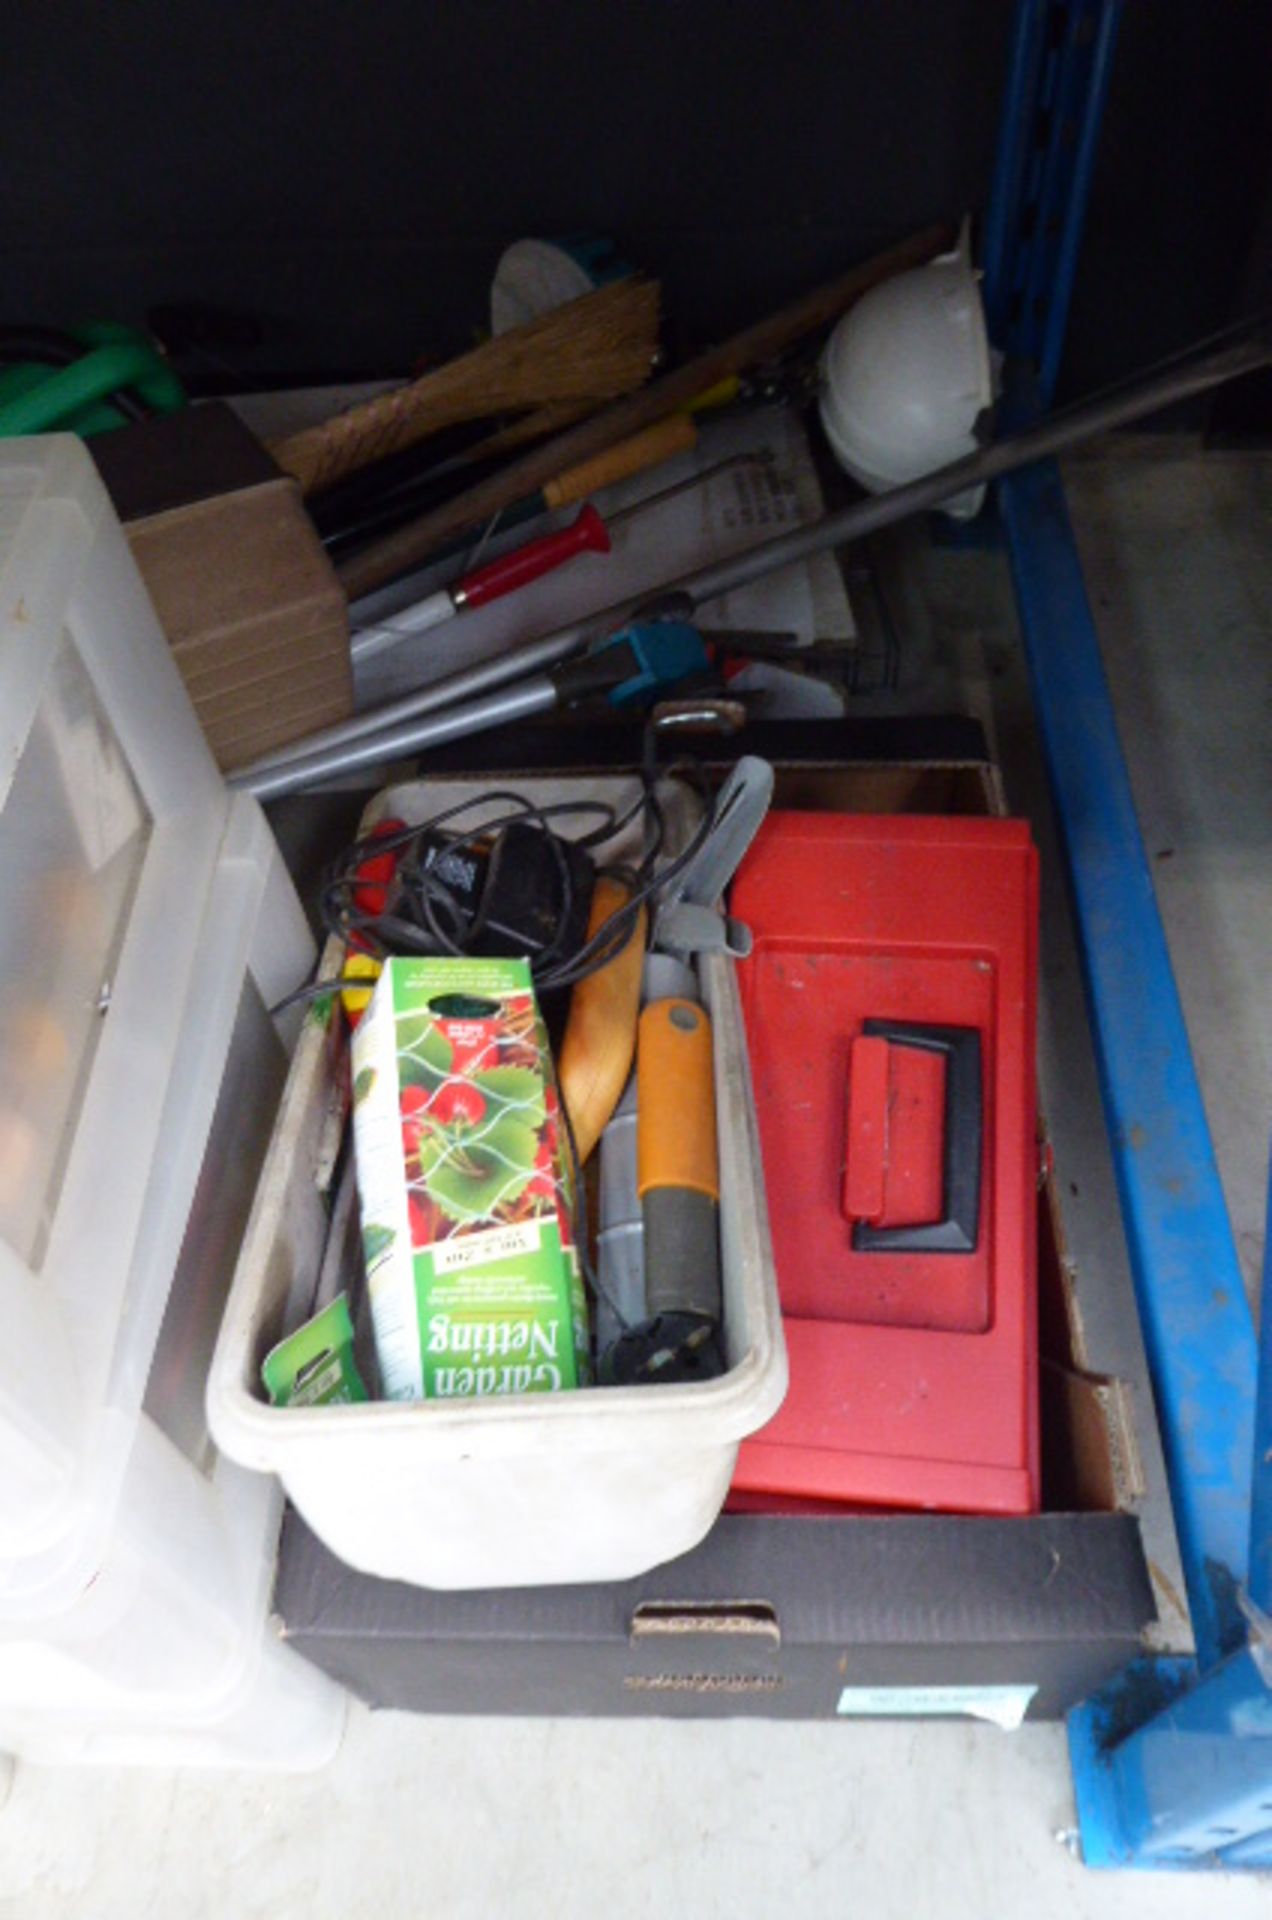 Large under bay of assorted tools inc. sprayer, Scorpion saw, saws, hedge cutters, tool boxes, - Image 3 of 5